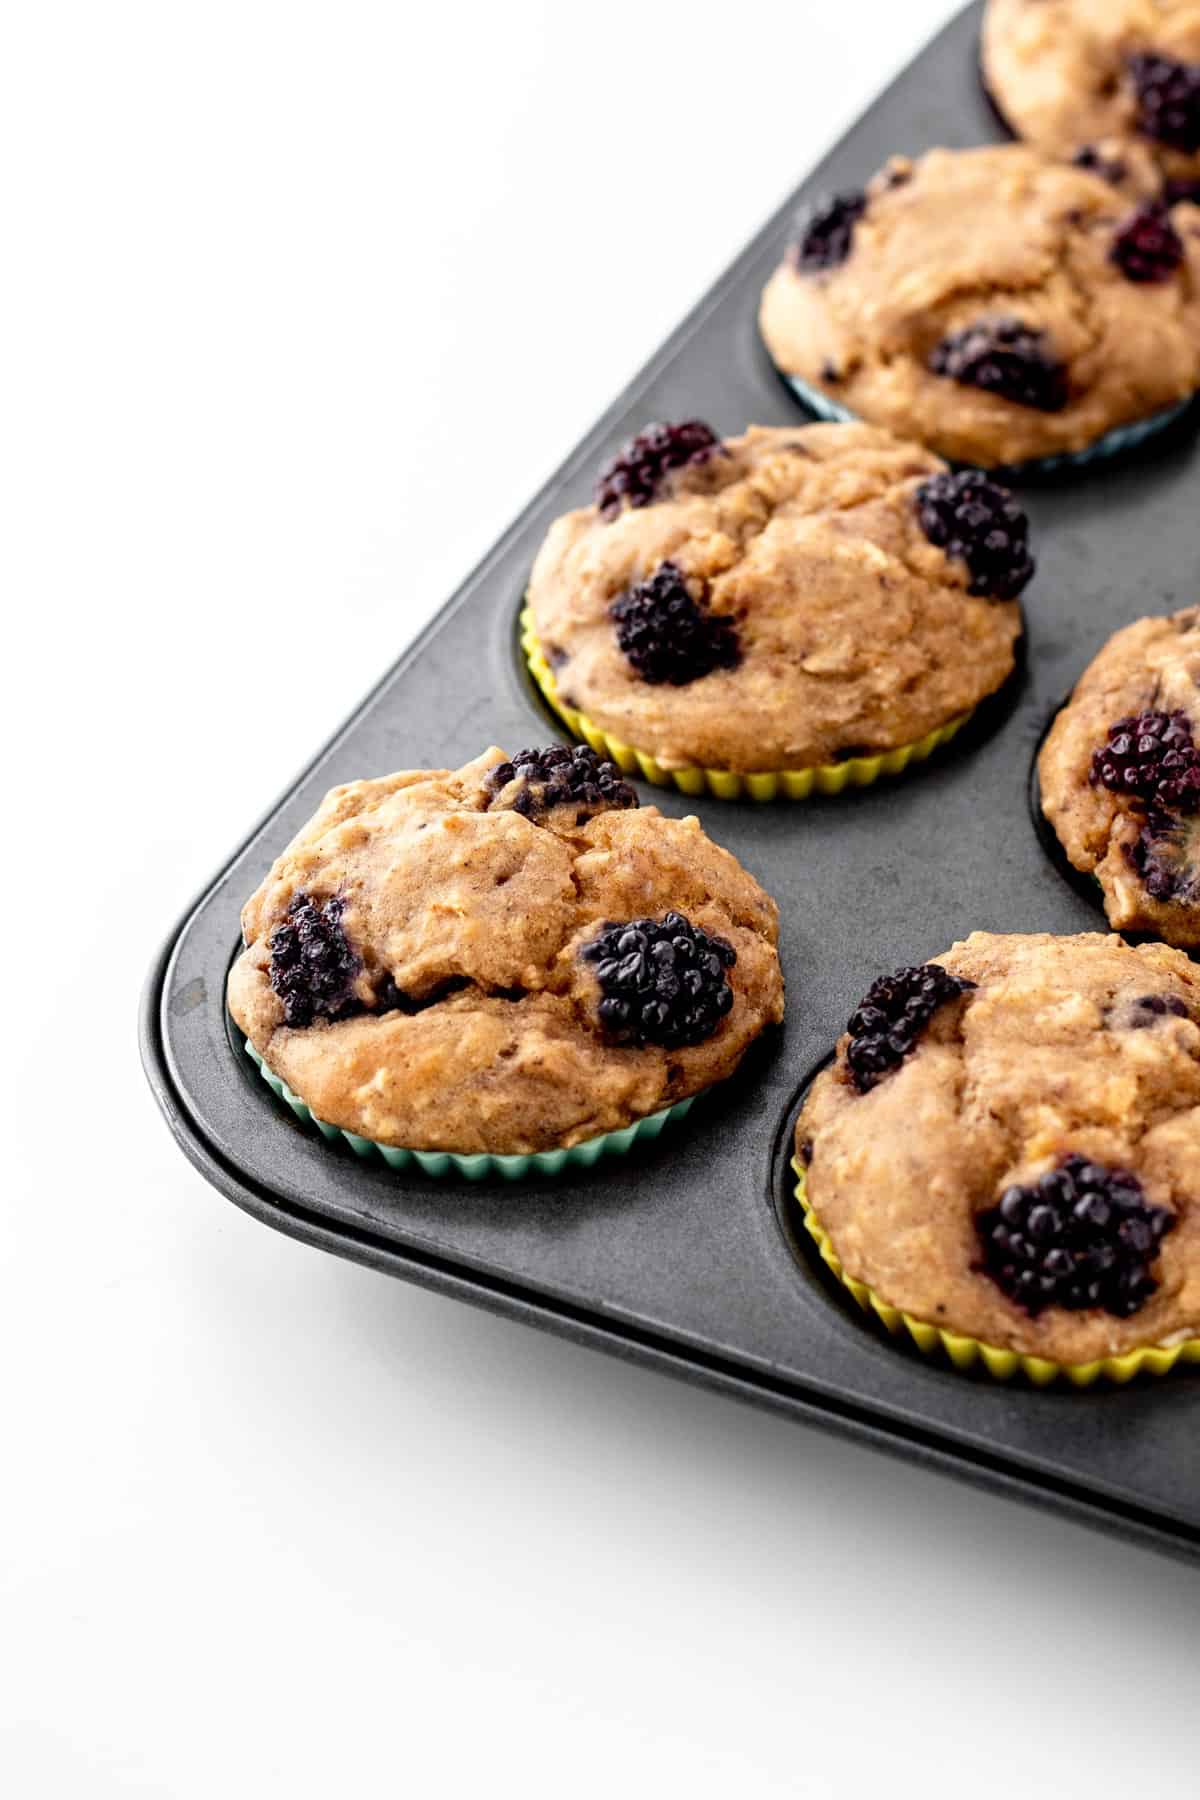 Four banana blackberry oatmeal muffins in the muffin tin after baking.